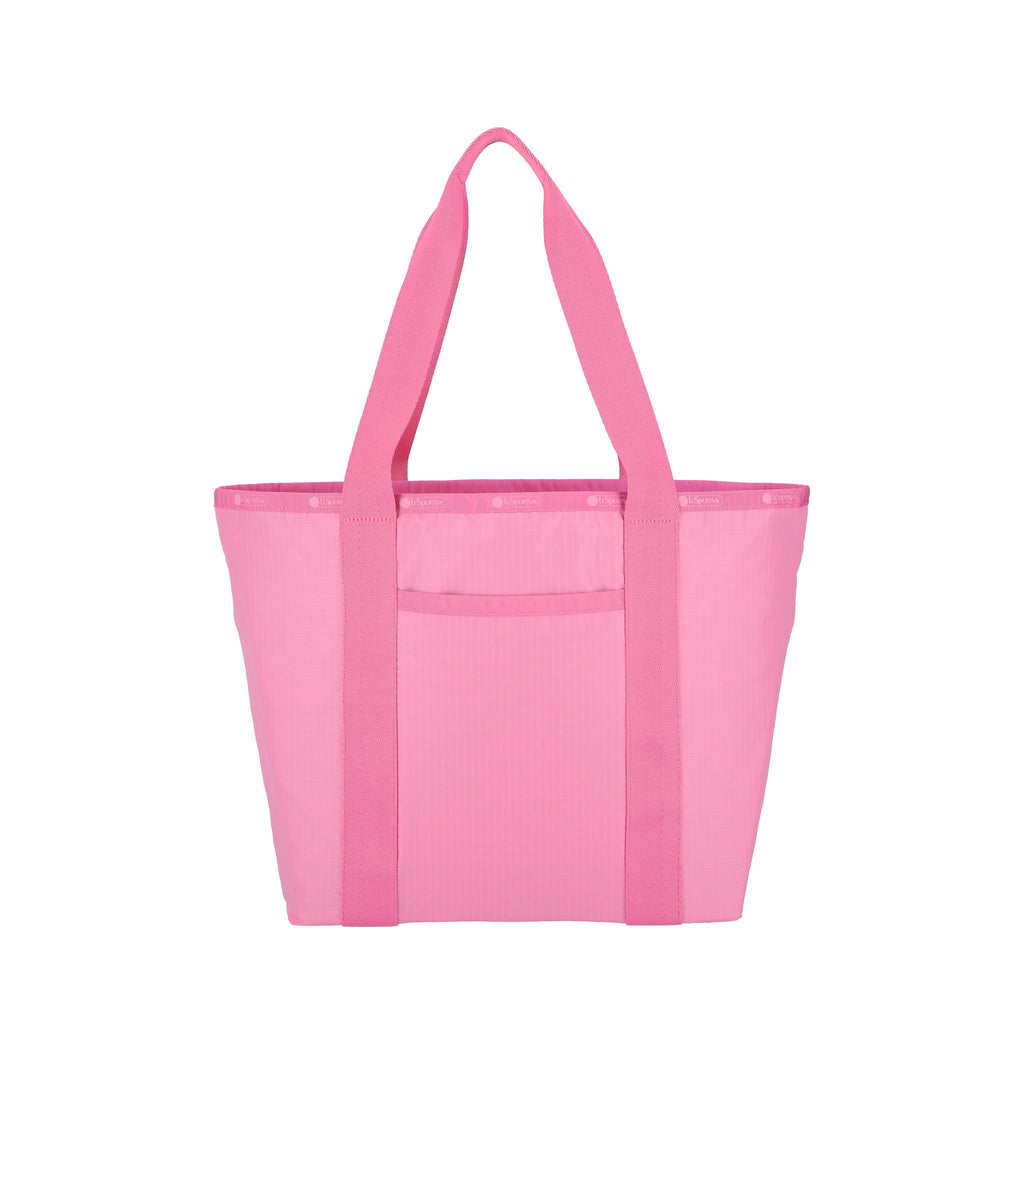 Small Tote Purse in Perfect Pink